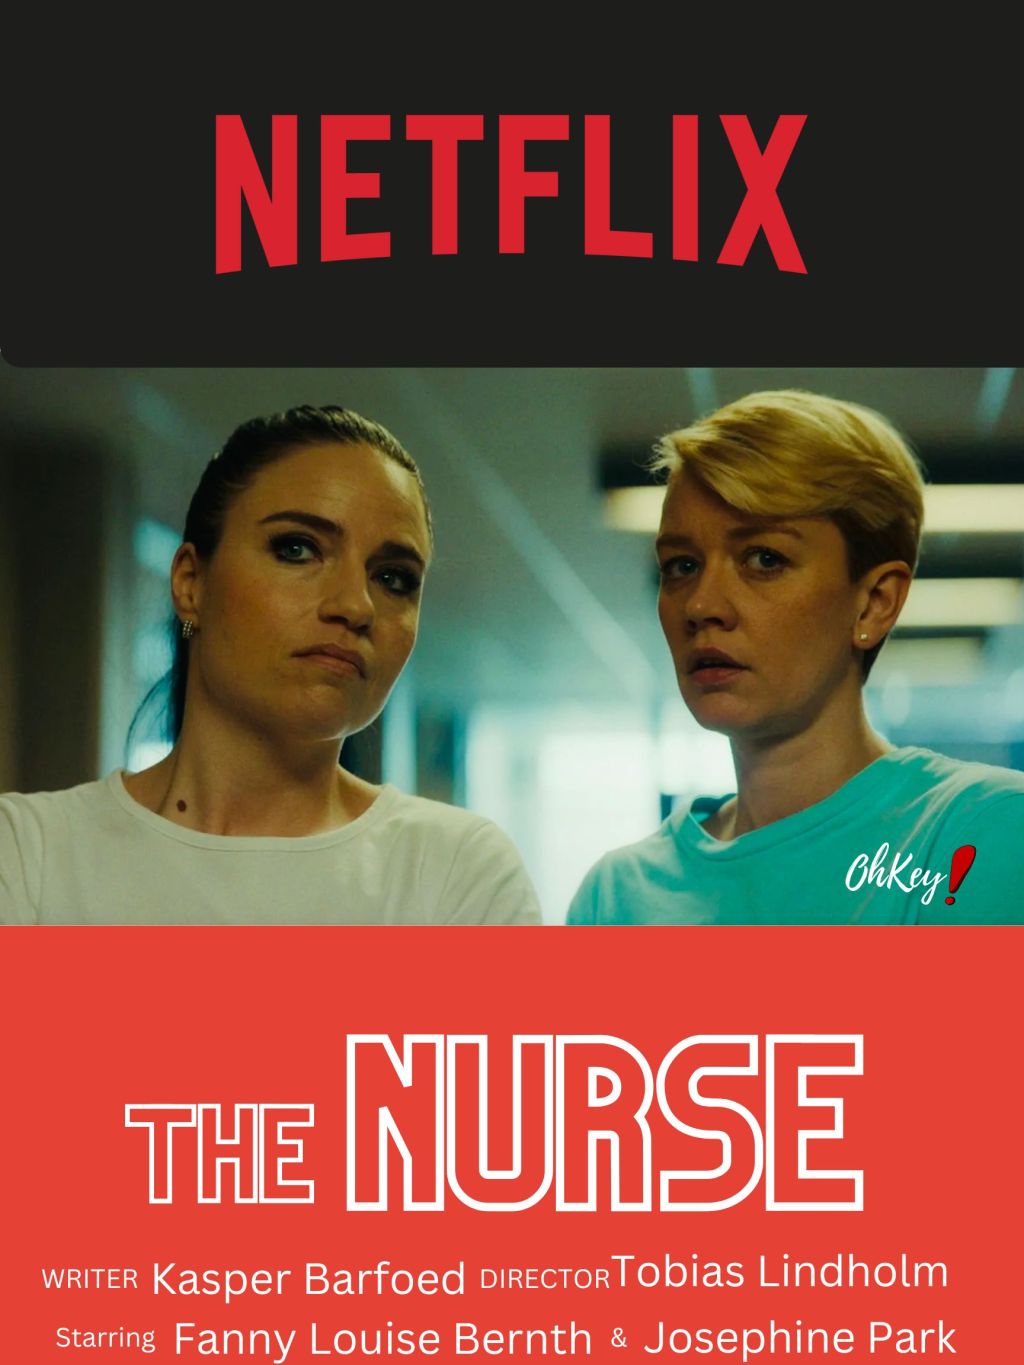 THE NURSE Limited Series Review